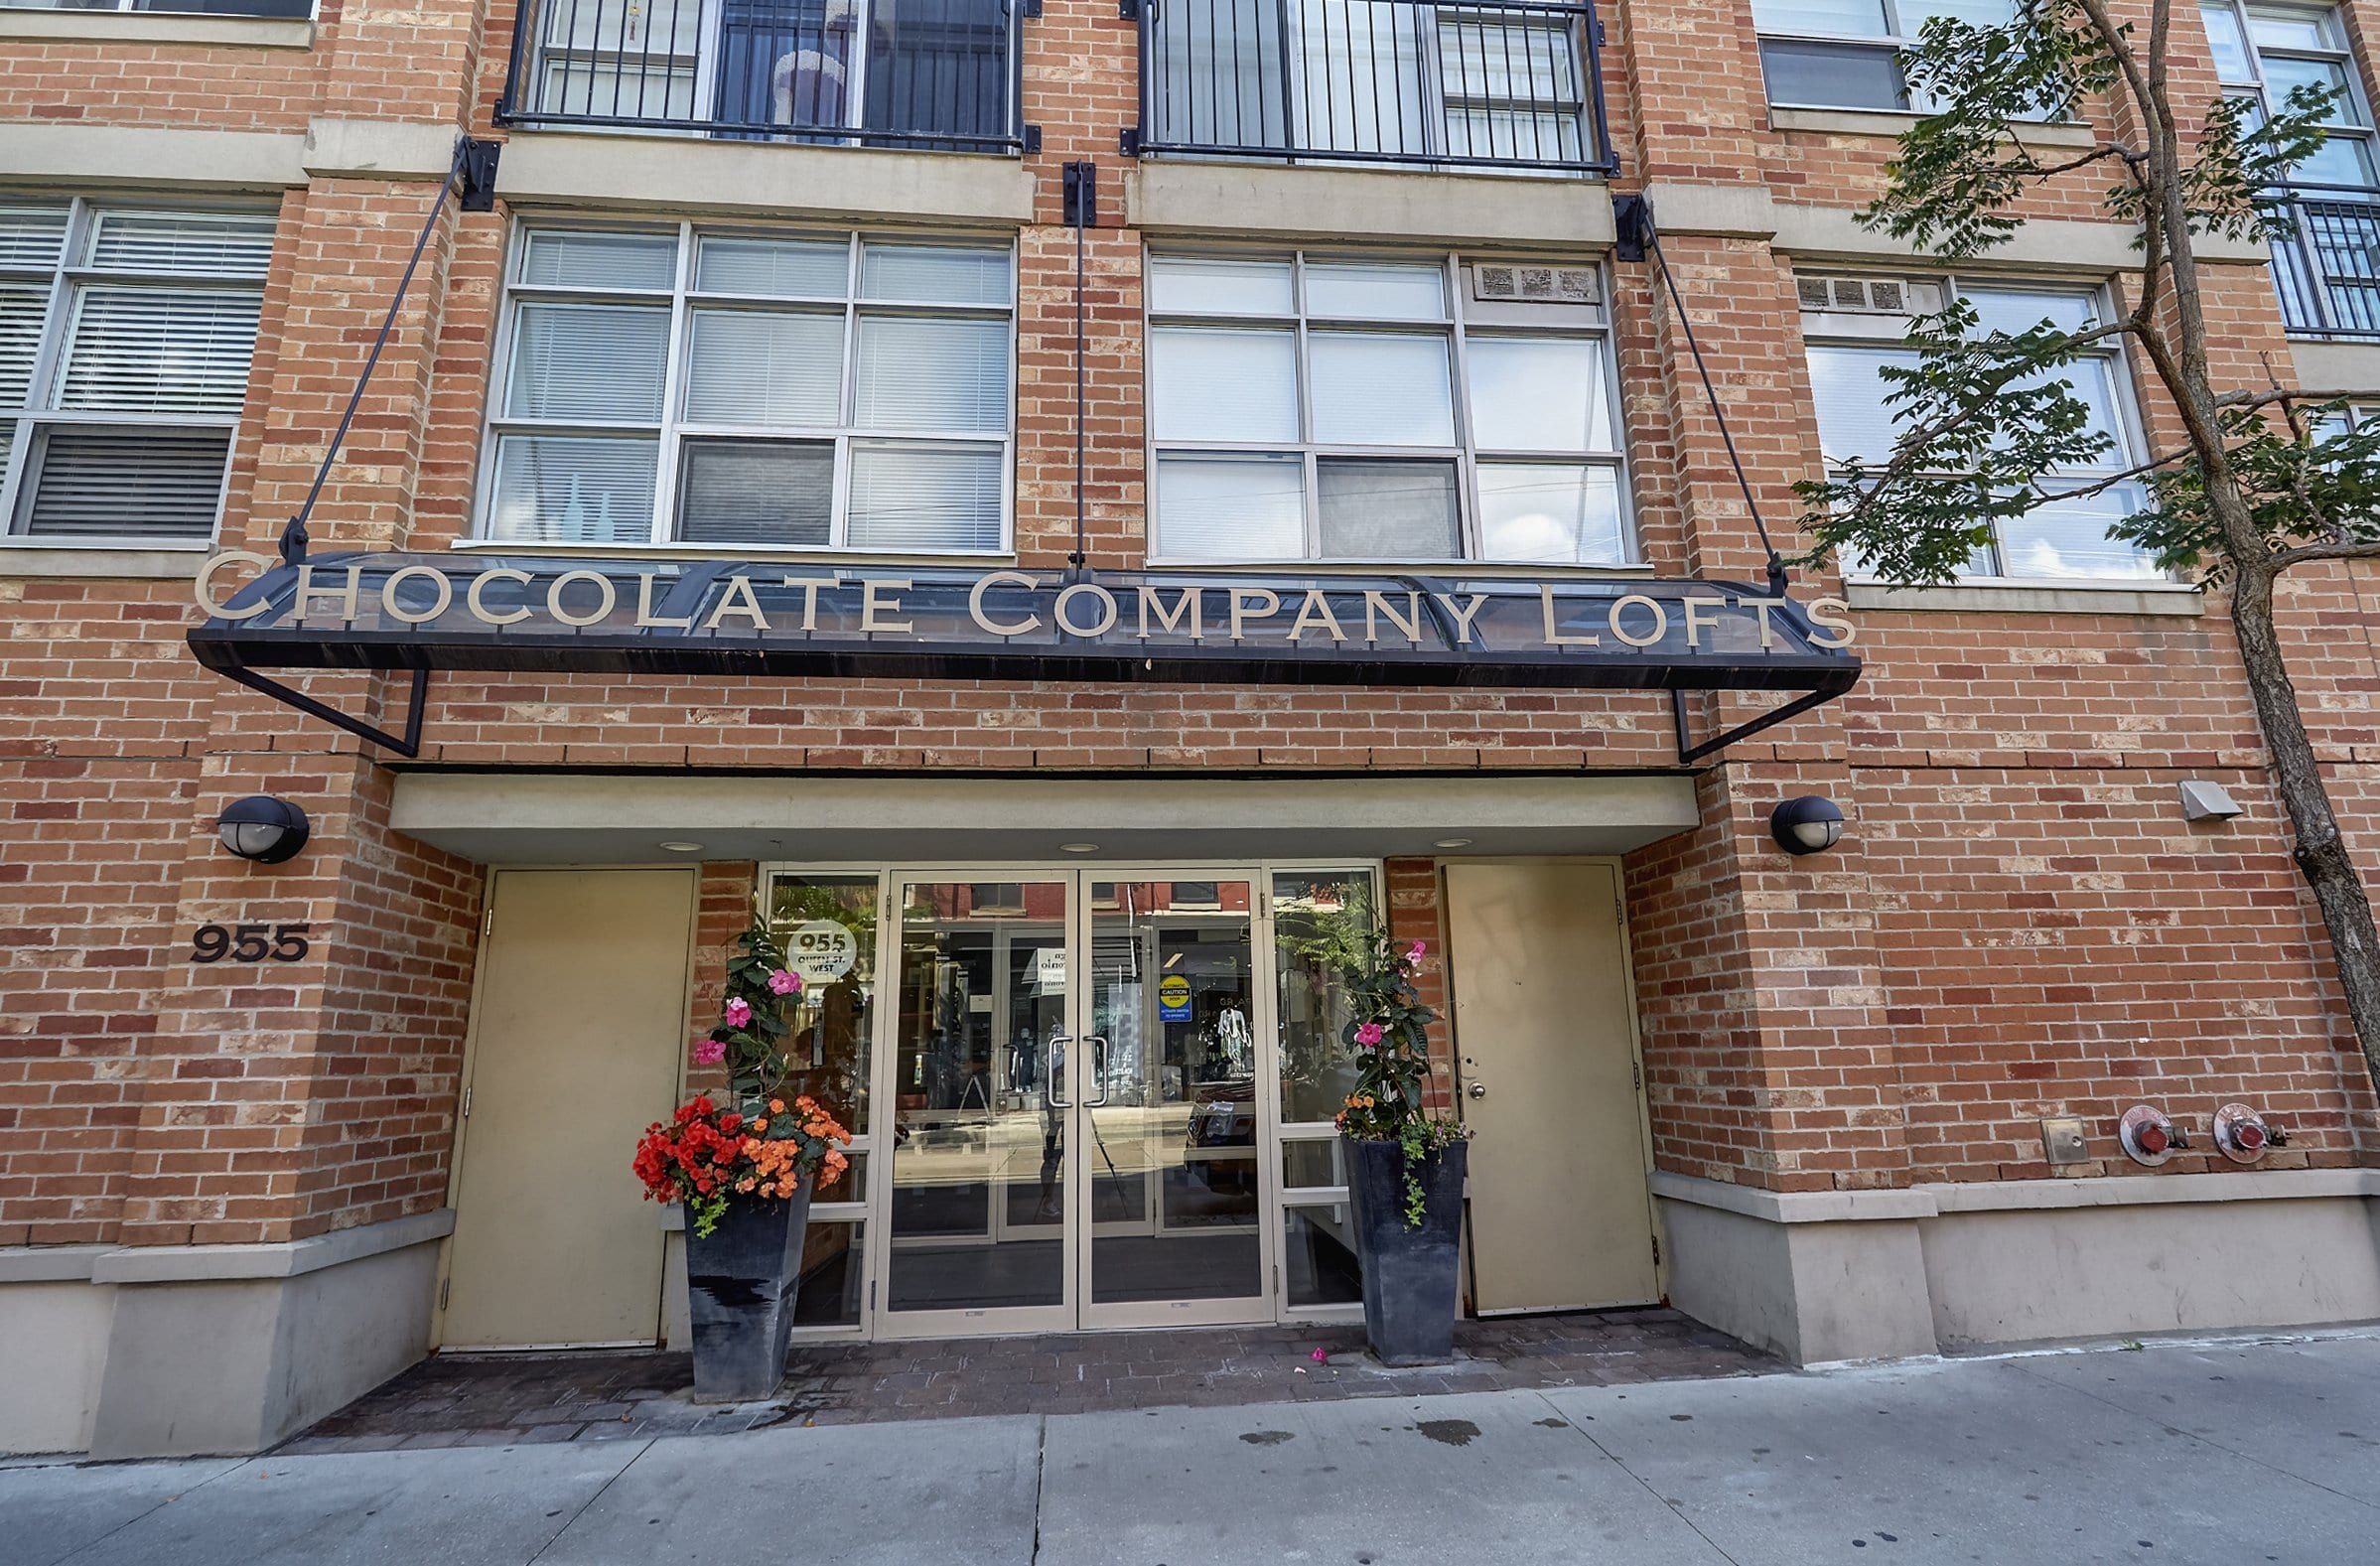 955 Queen Street West - Chocolate Company Lofts